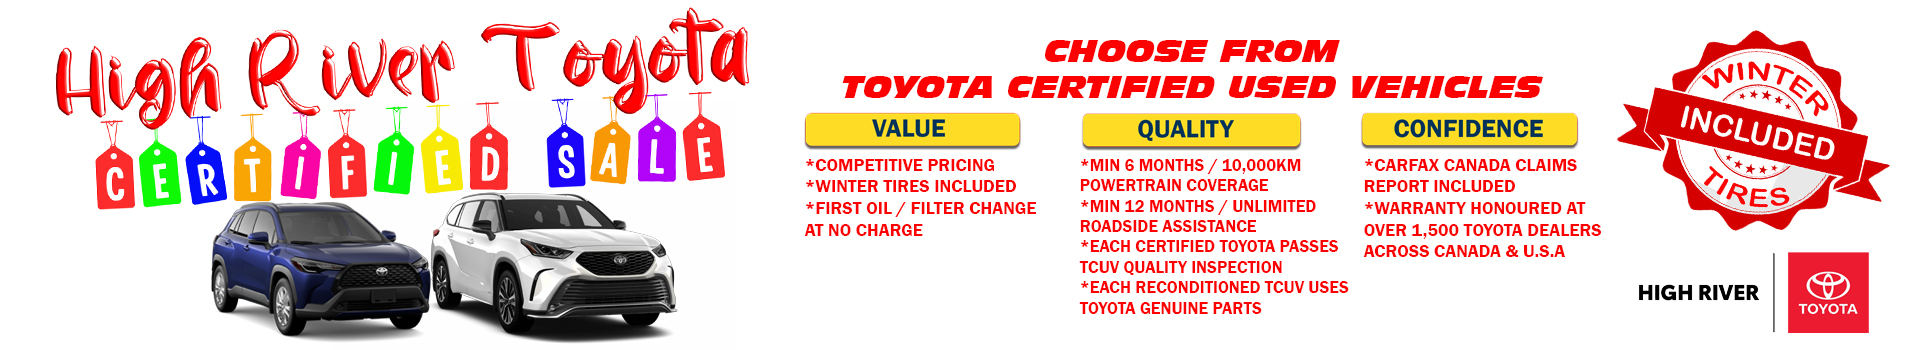 High River Toyota Certified Sale